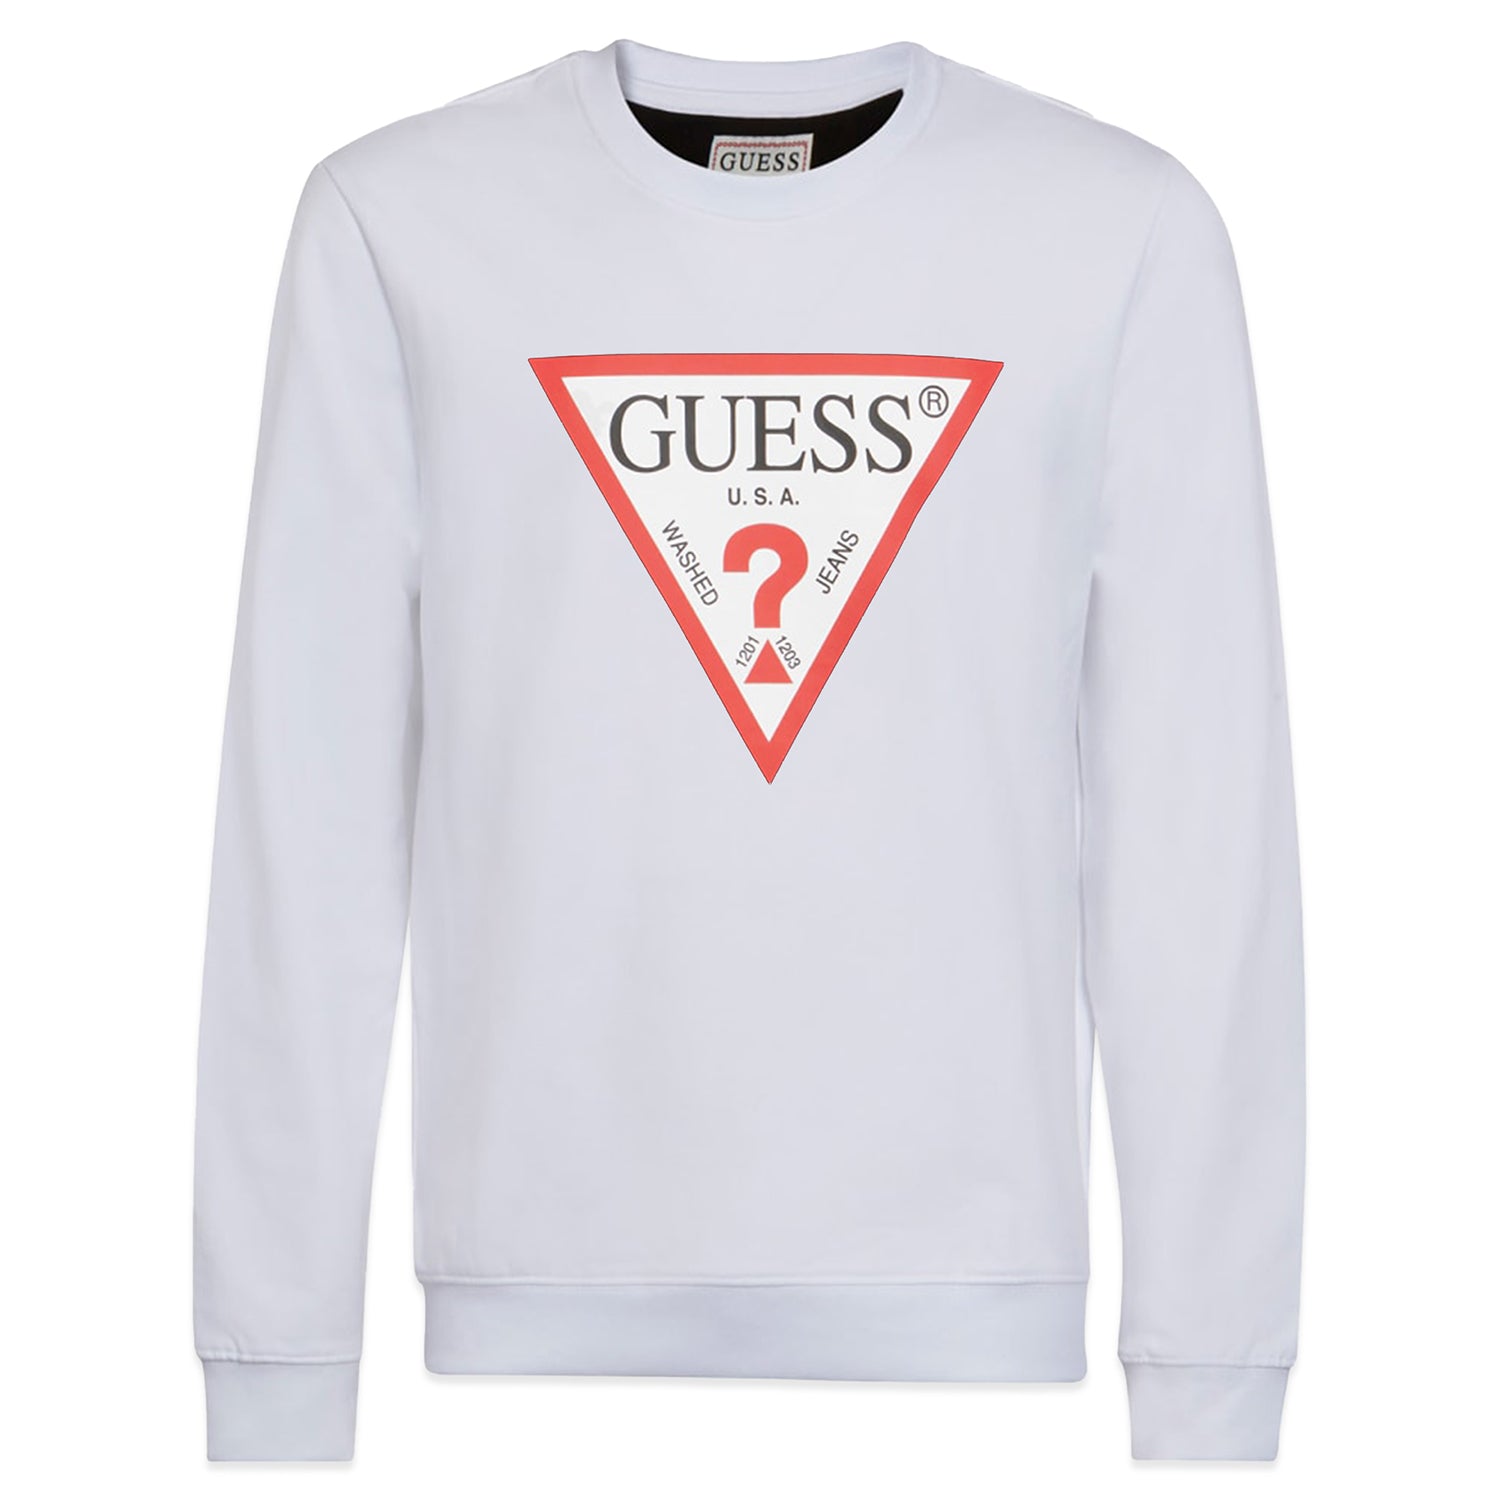 Guess Audley Fleece Crew Sweat - White